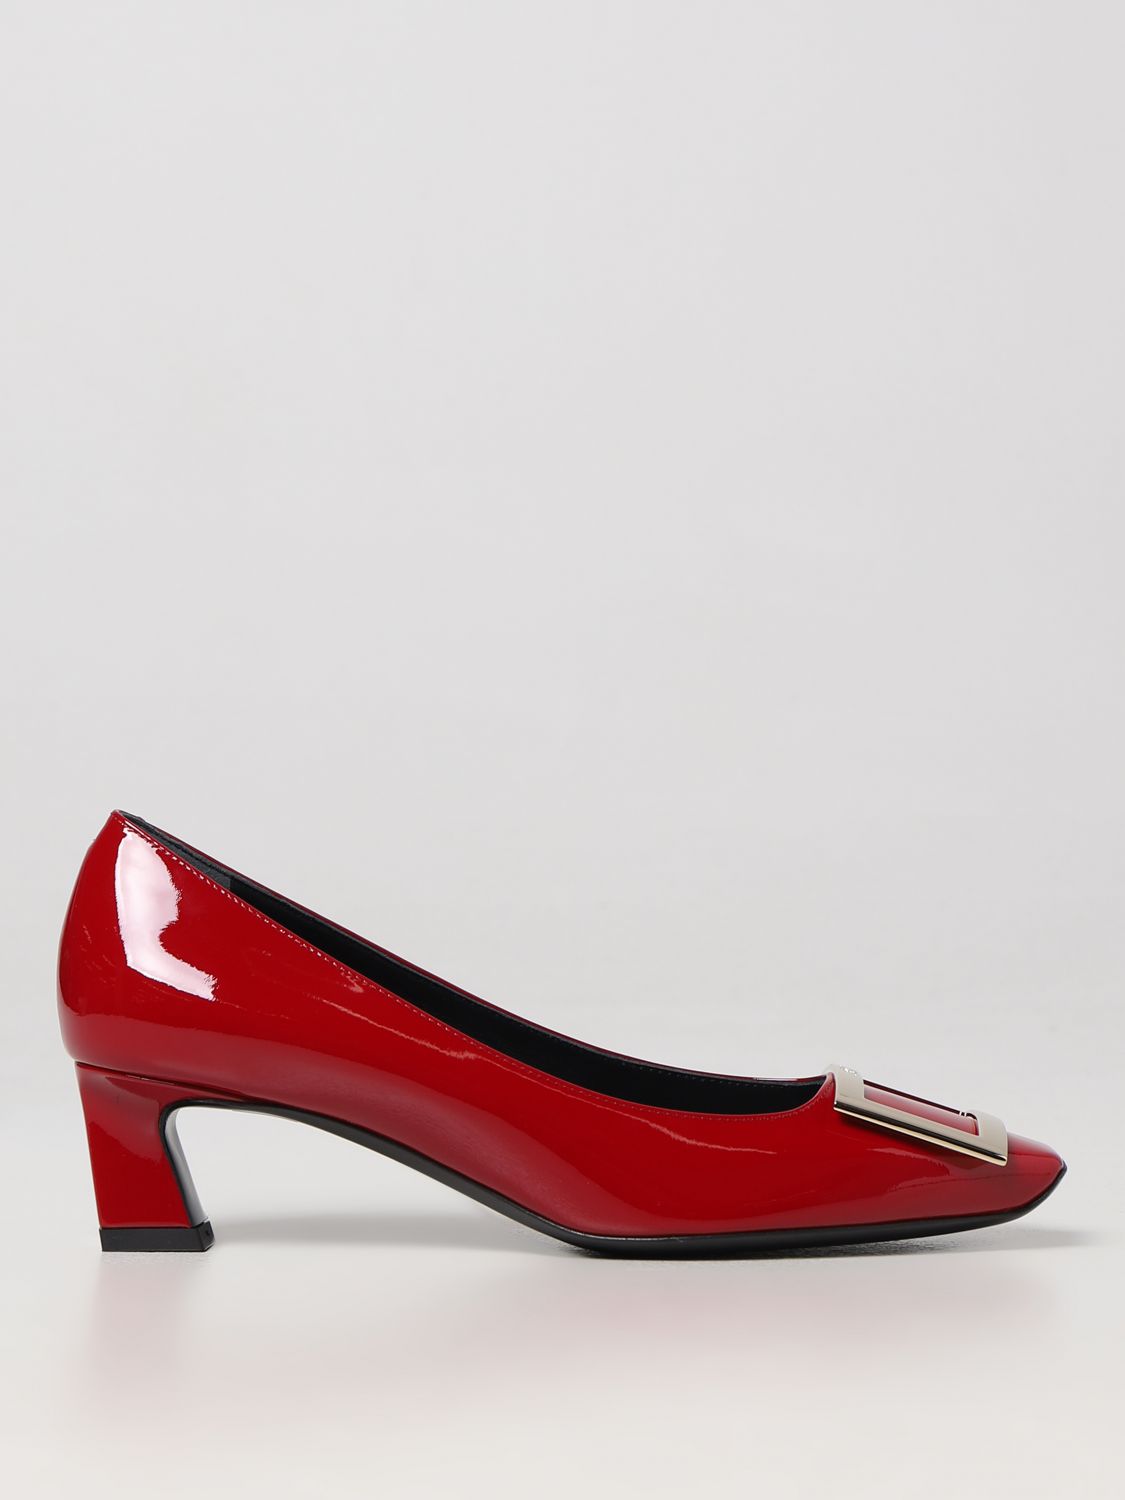 Roger Vivier 45mm Trompette Patent Leather Pumps In Red